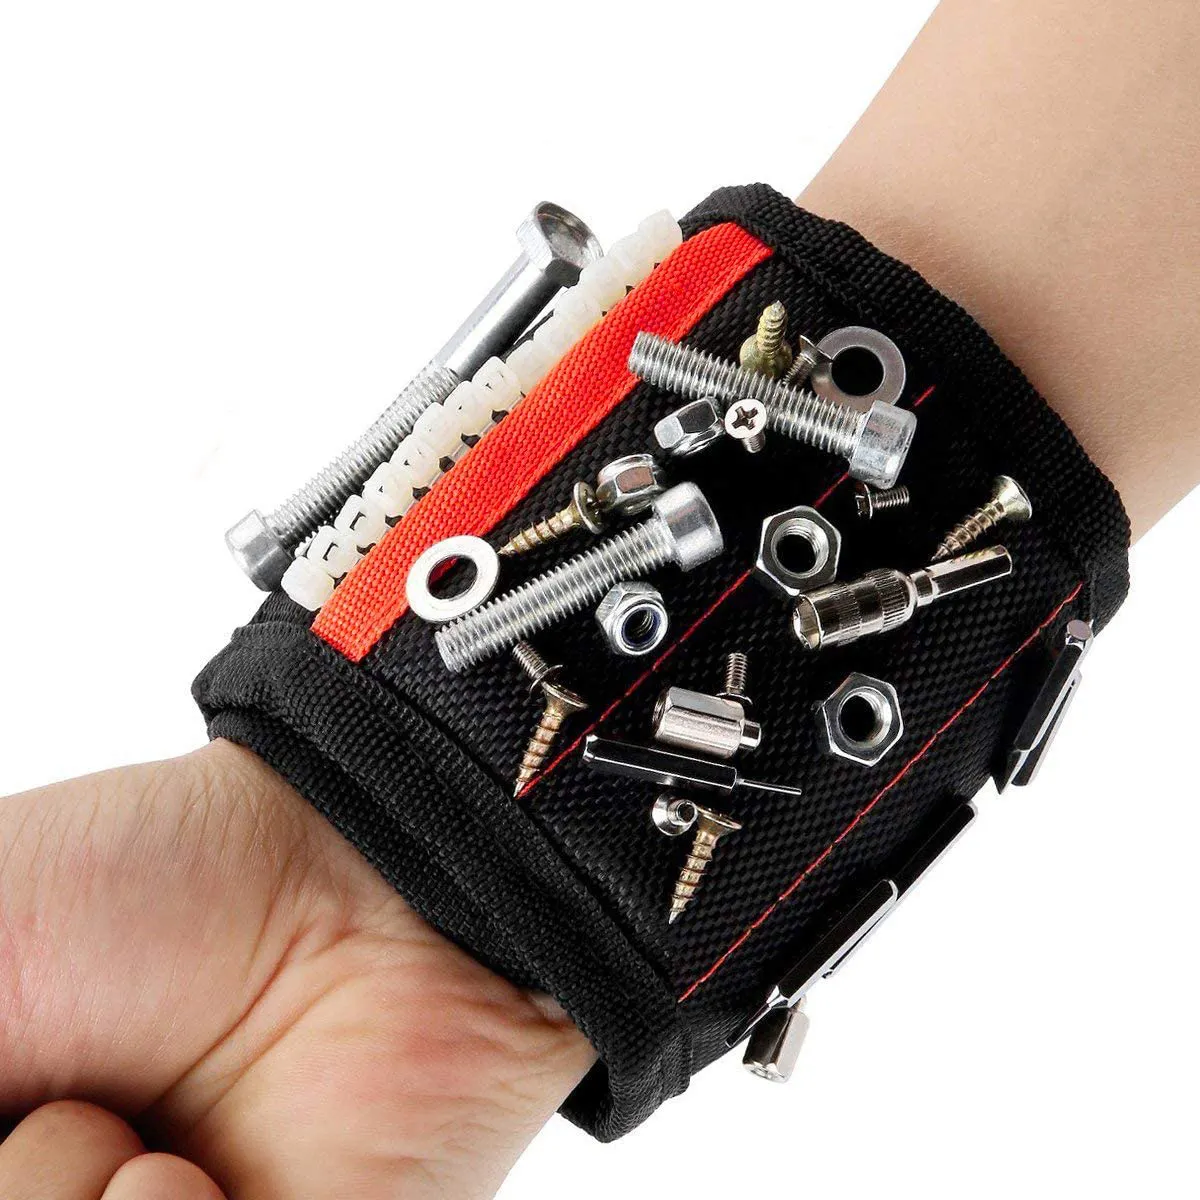 Super Magnetic Wristband Tool for Holding Screws Construction Tools and Equipment and Other Hand Tools